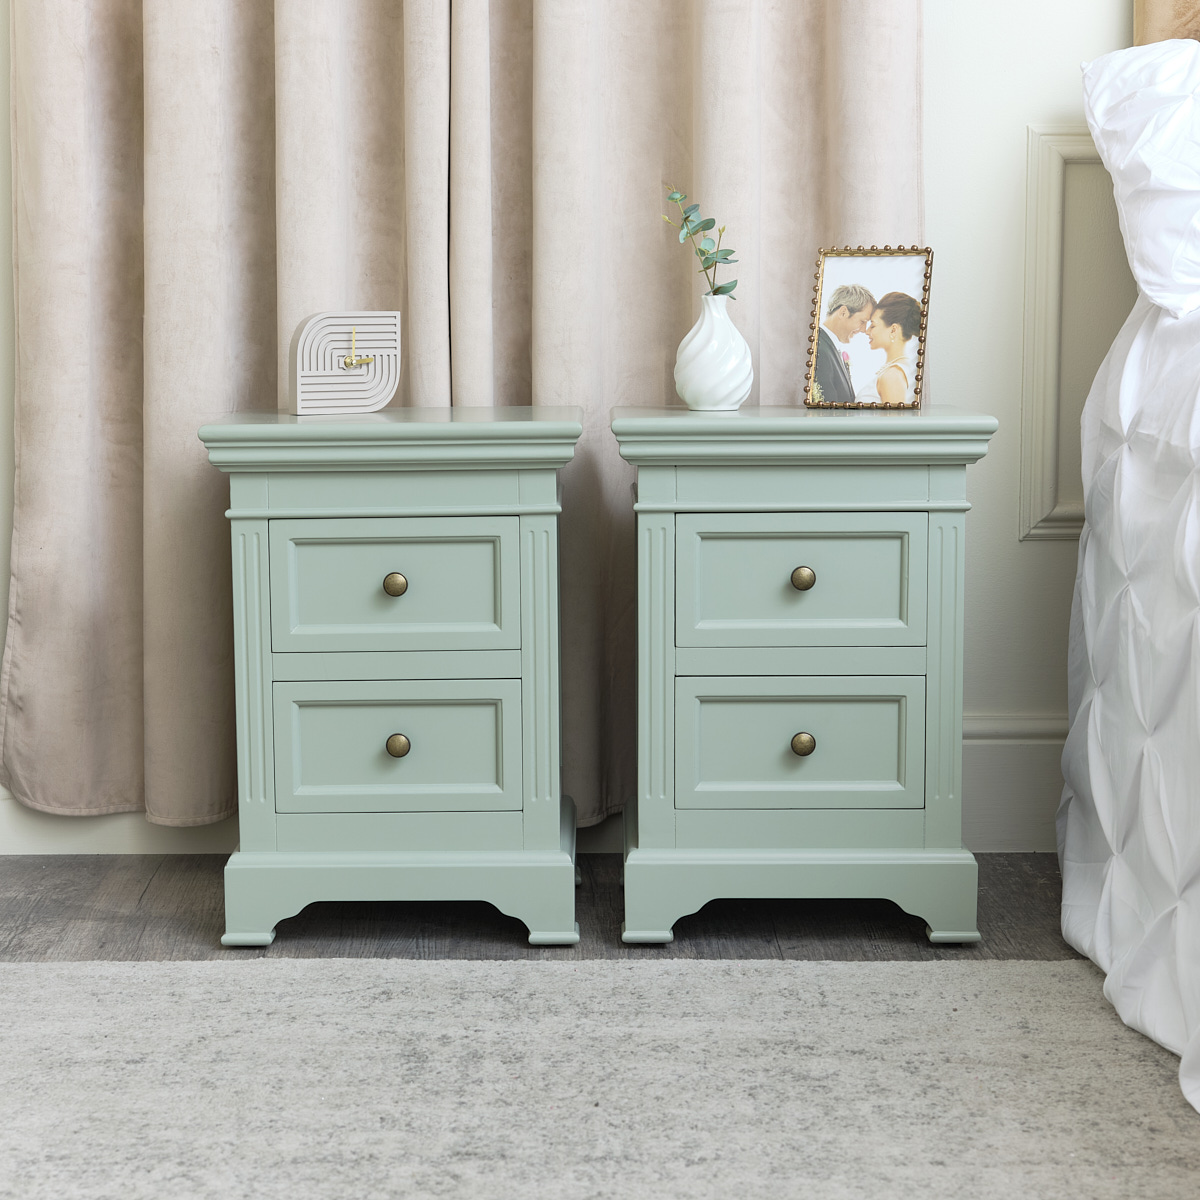 Pair of Sage Green Two Drawer Bedside Tables - Daventry Sage Green Range